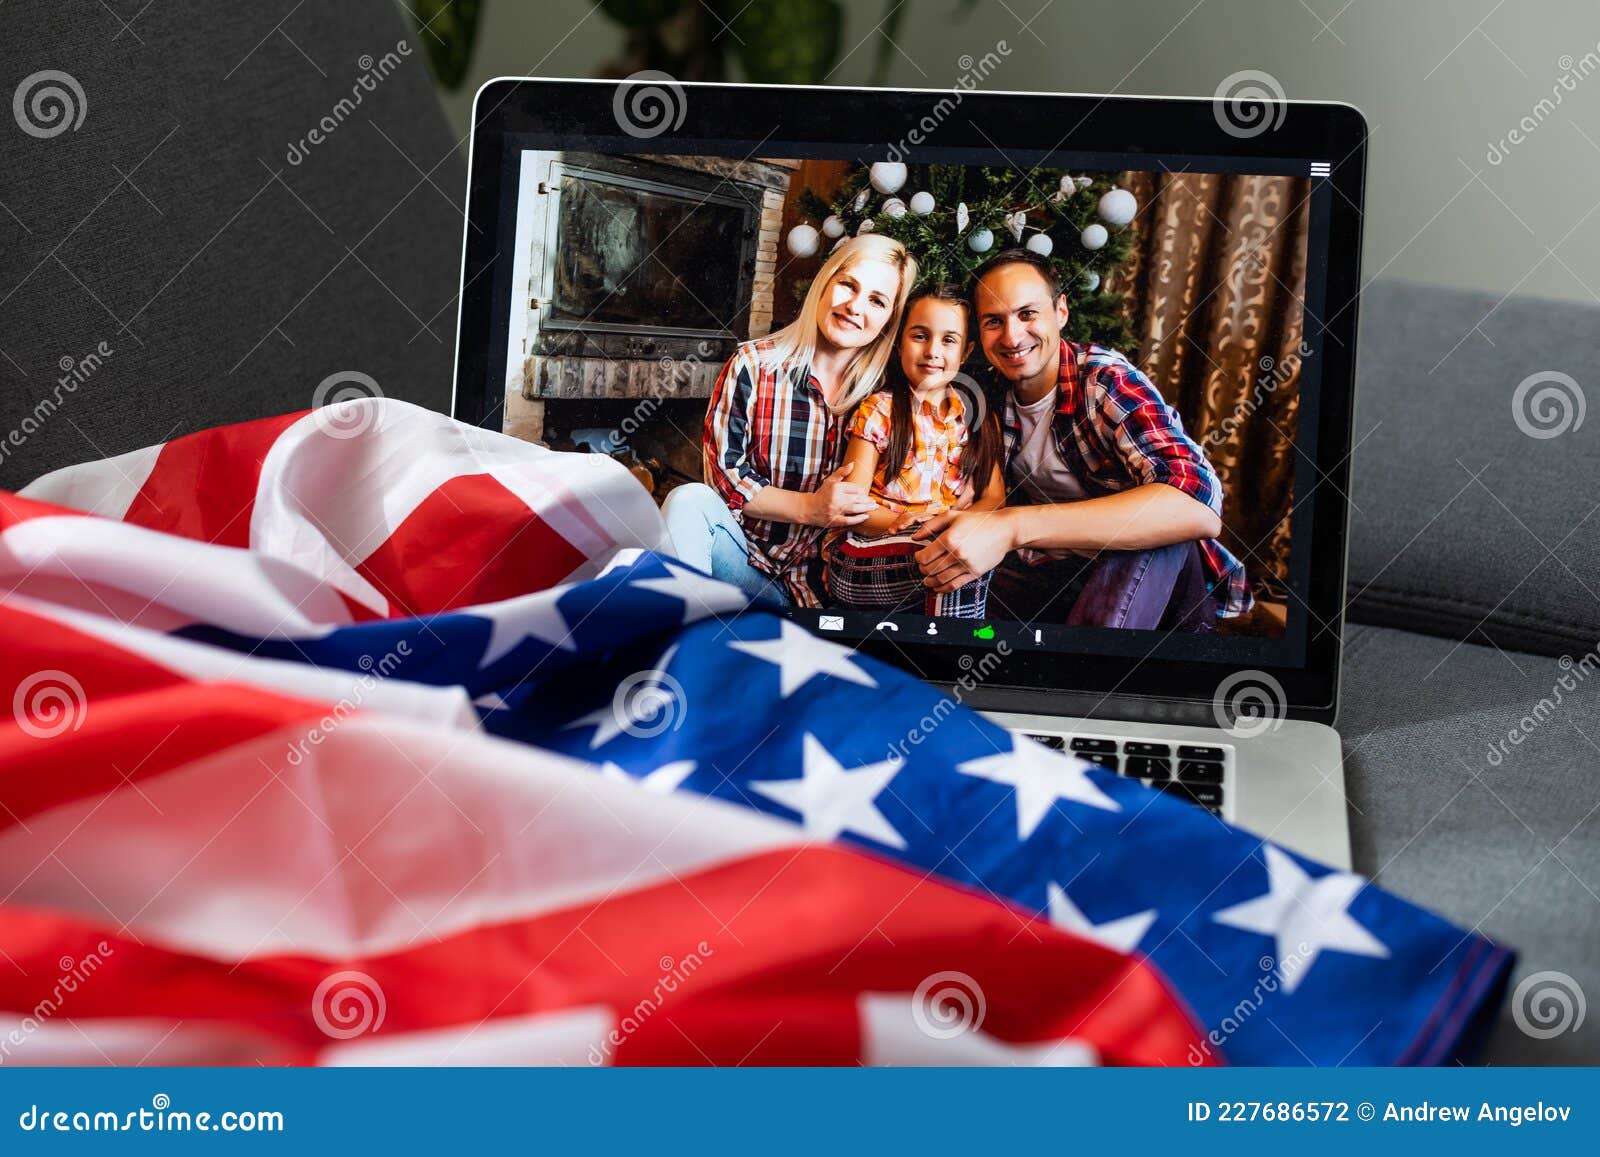 Video chat usa